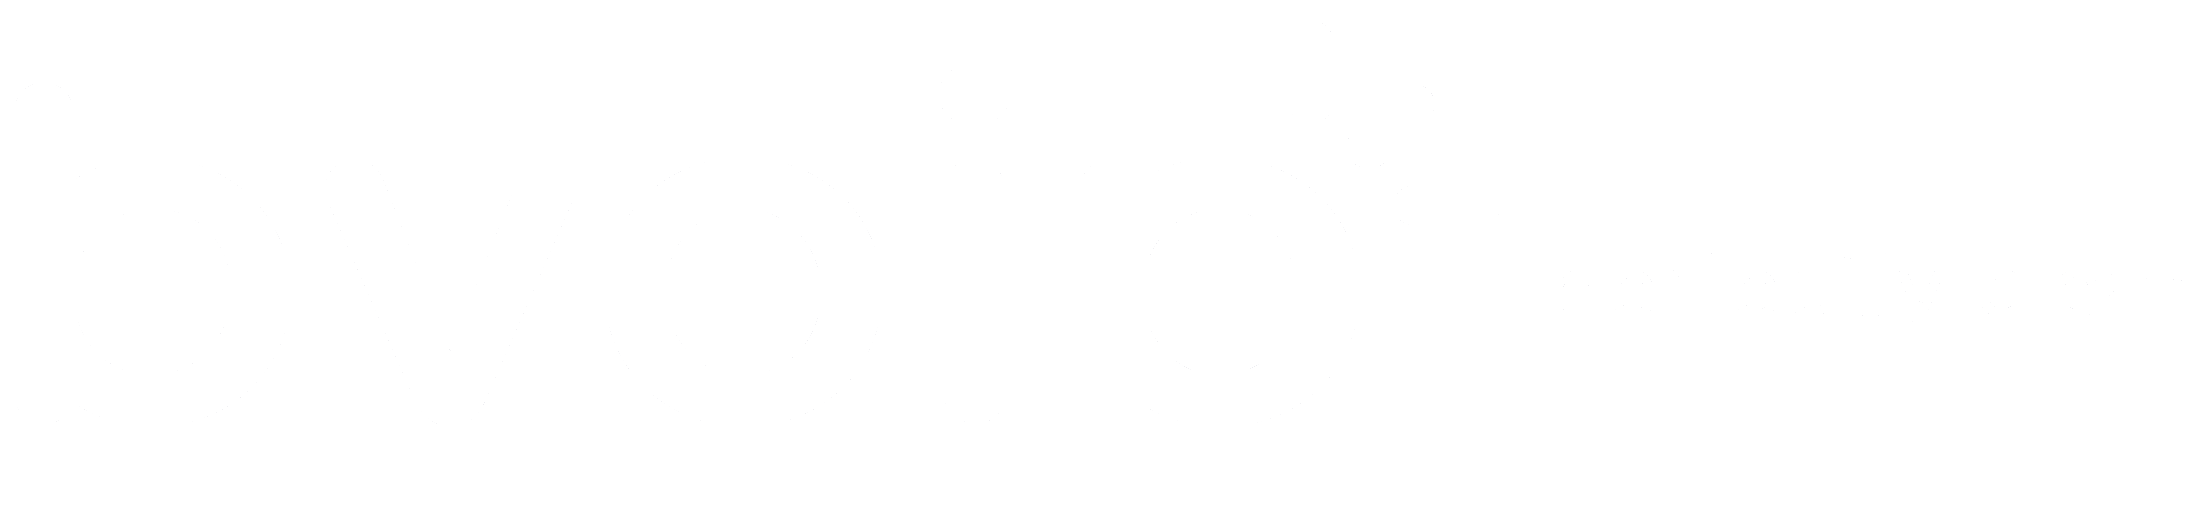 white bvoip logo - perfectly clear